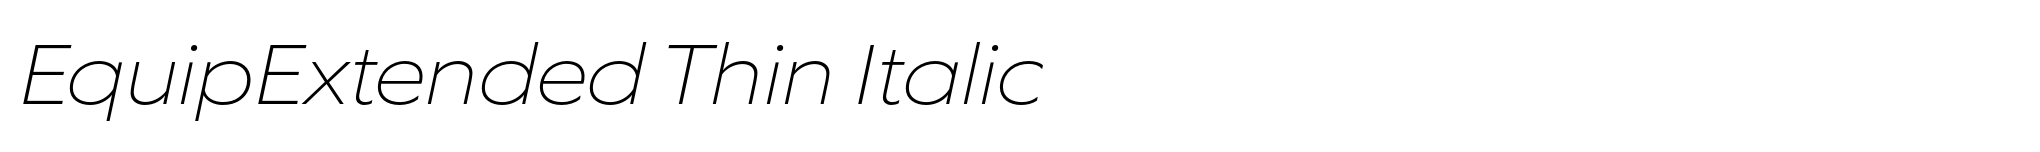 EquipExtended Thin Italic image